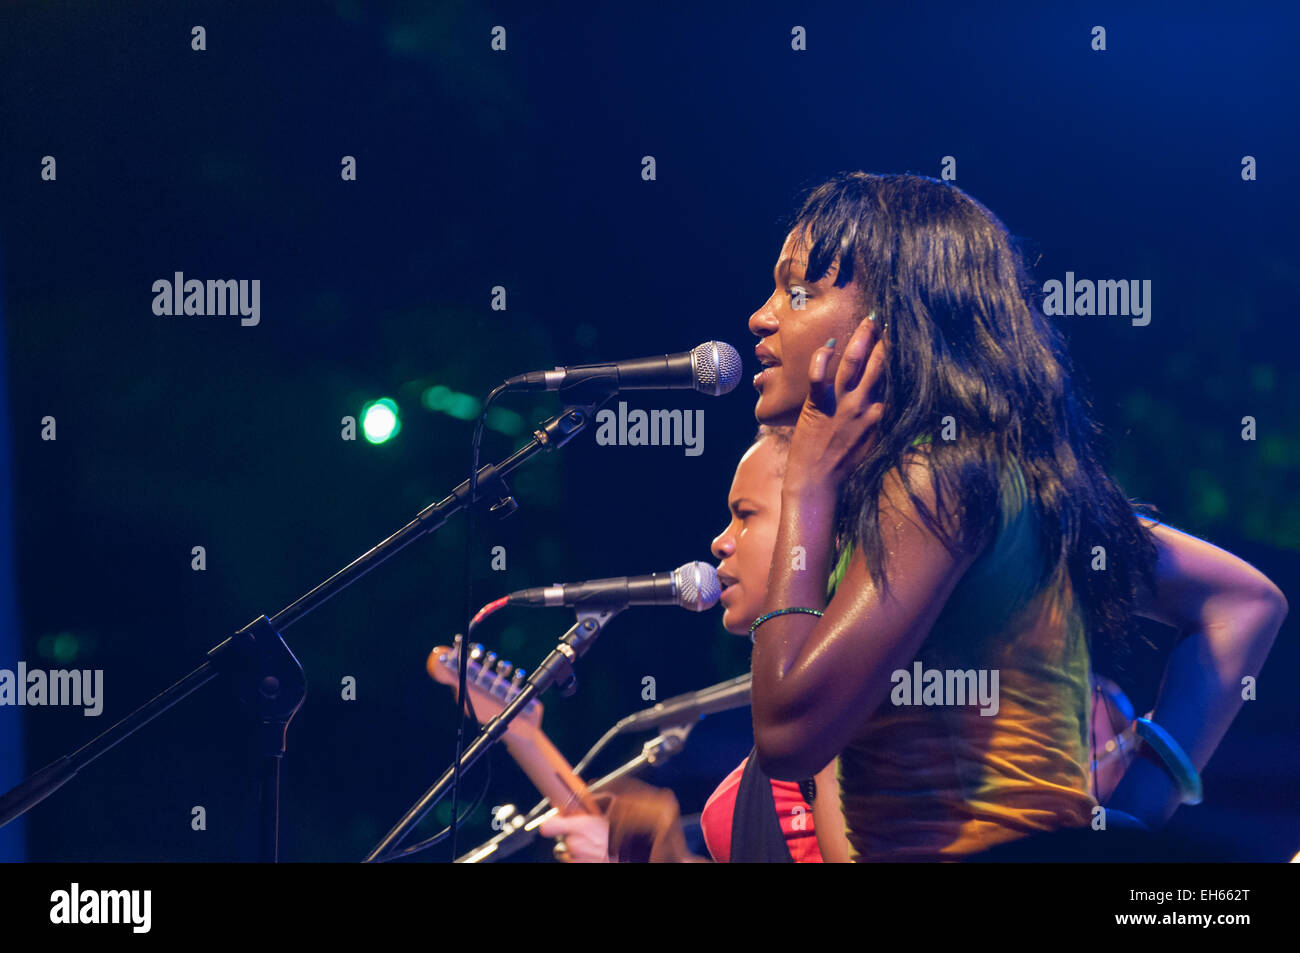 Santo Domingo, Dominican republic - September 05 - 2010: Singer performs onstage at jazz dominican festival September 05 - 2010 Stock Photo